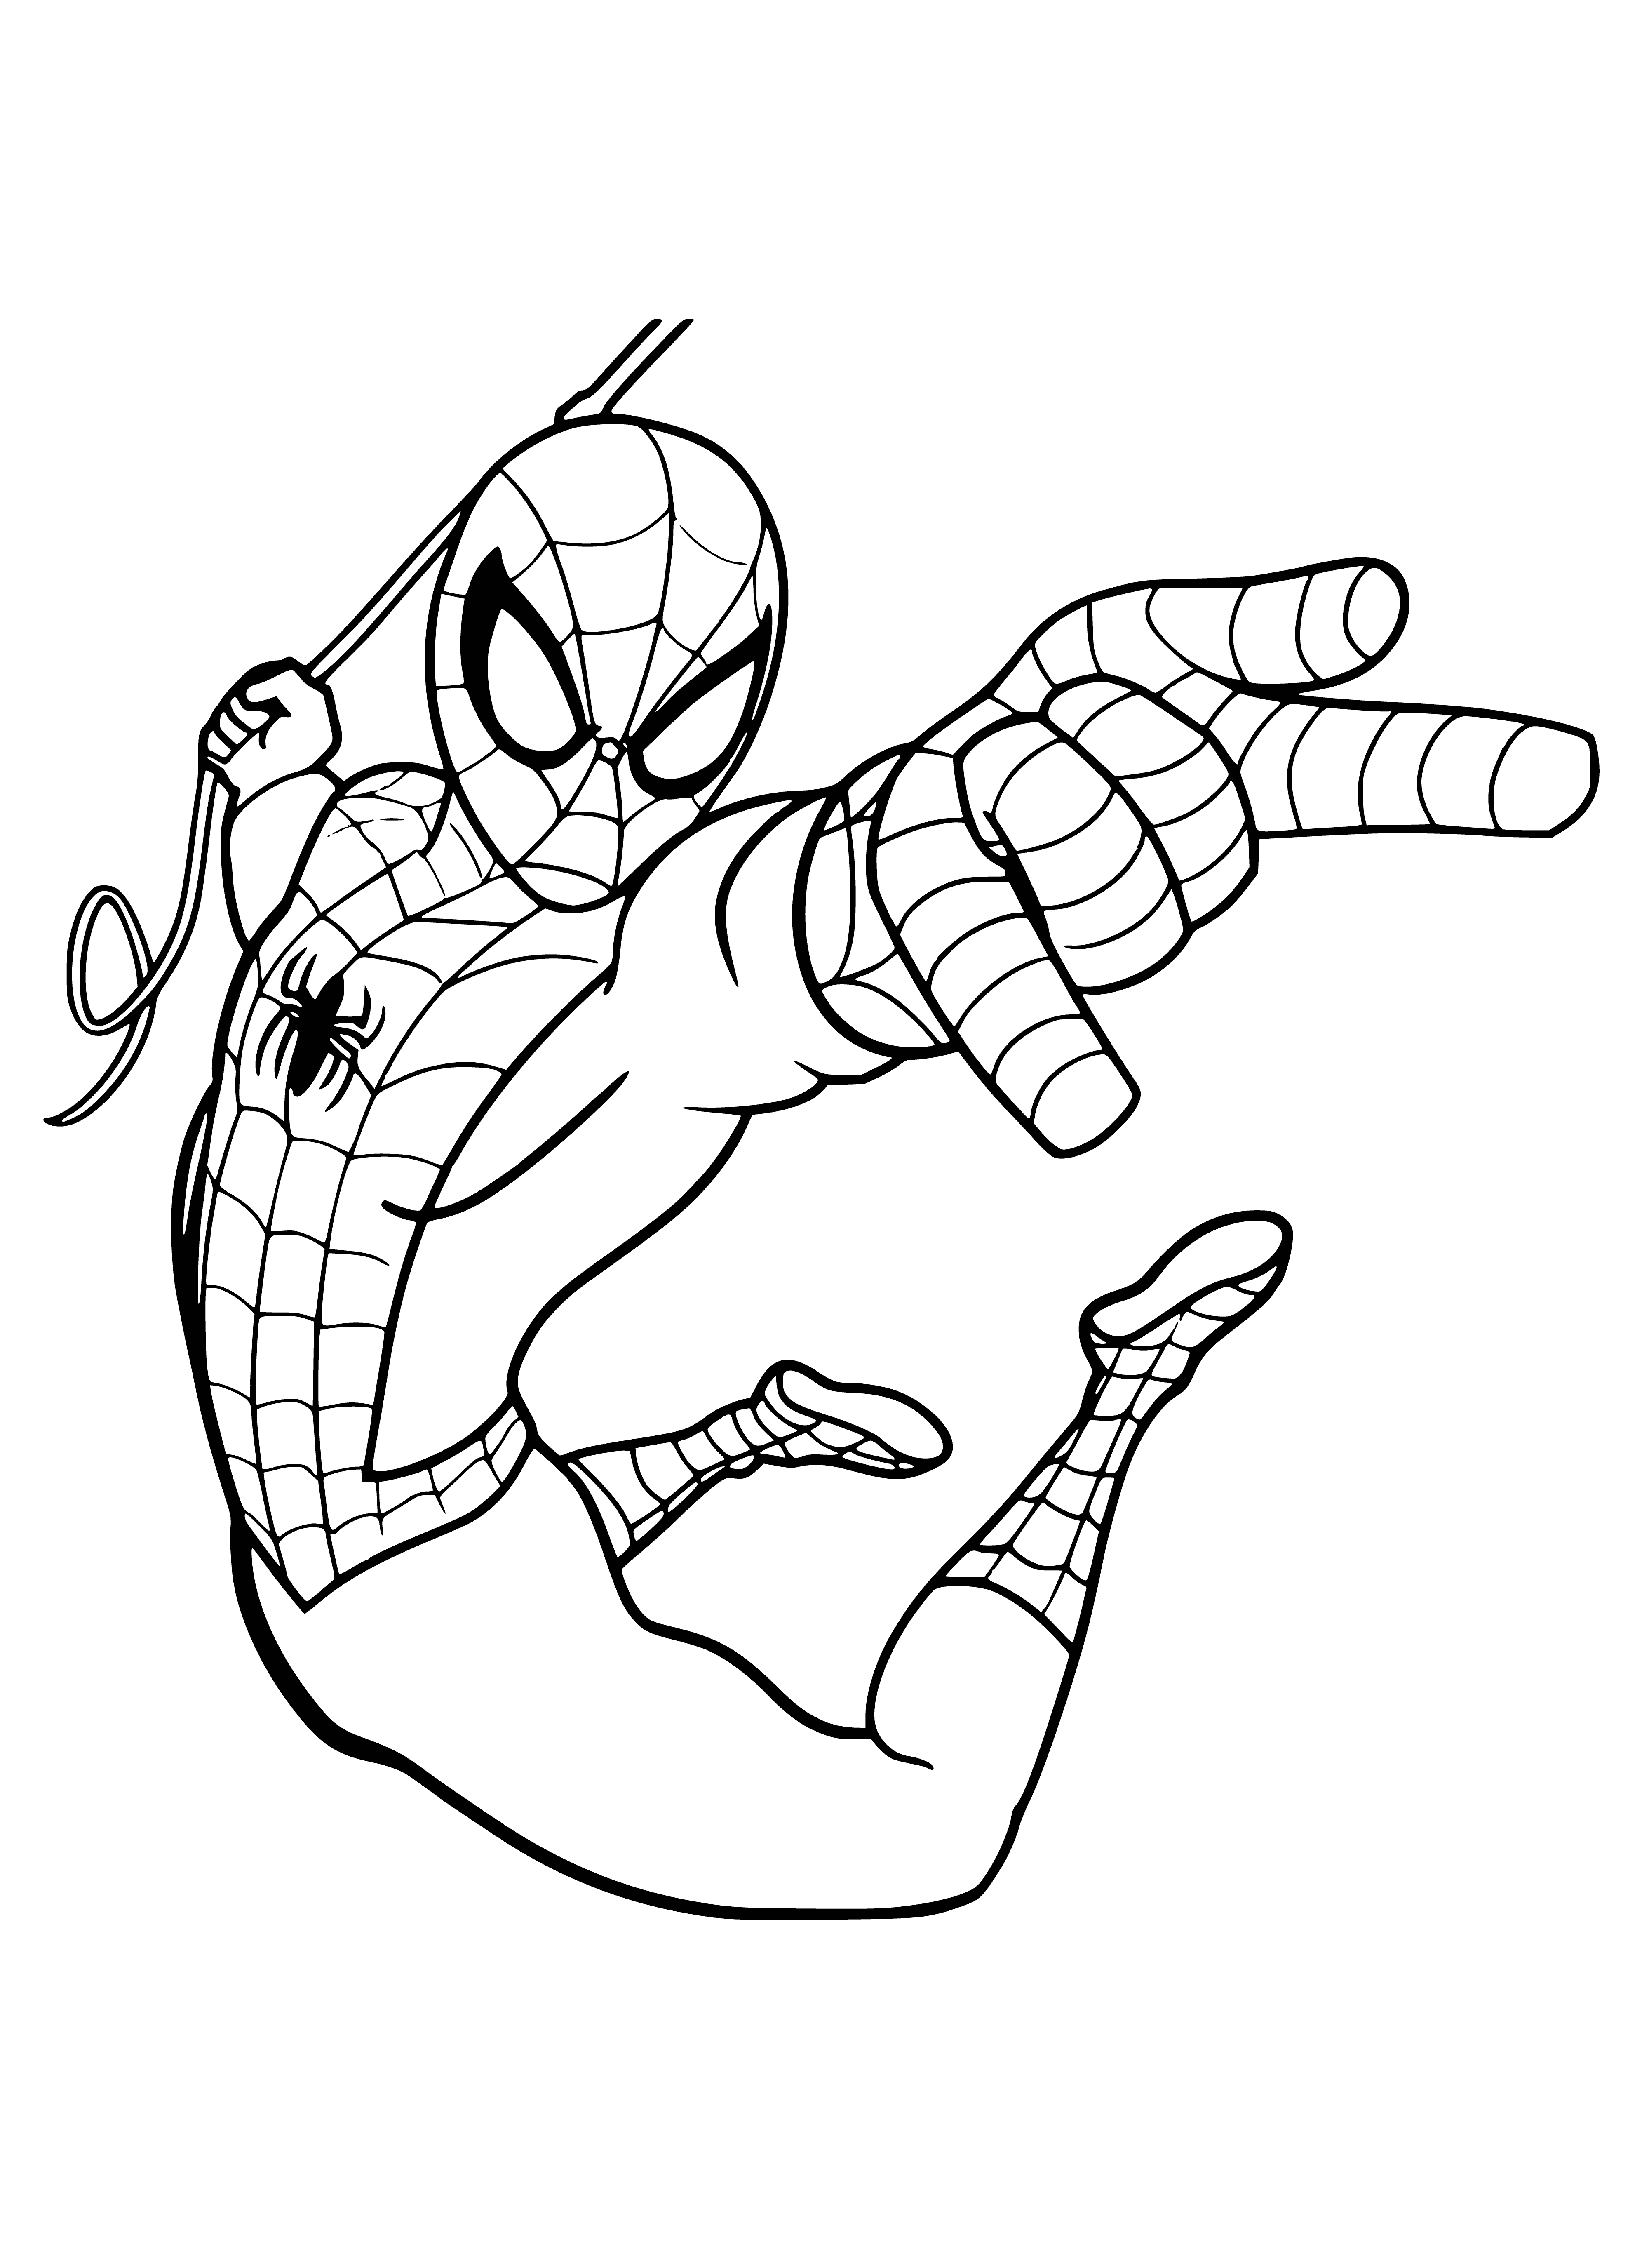 coloring page: Man in red/blue suit holds thin white rope, standing firmly with spider symbol on chest, red mask and black eyes.